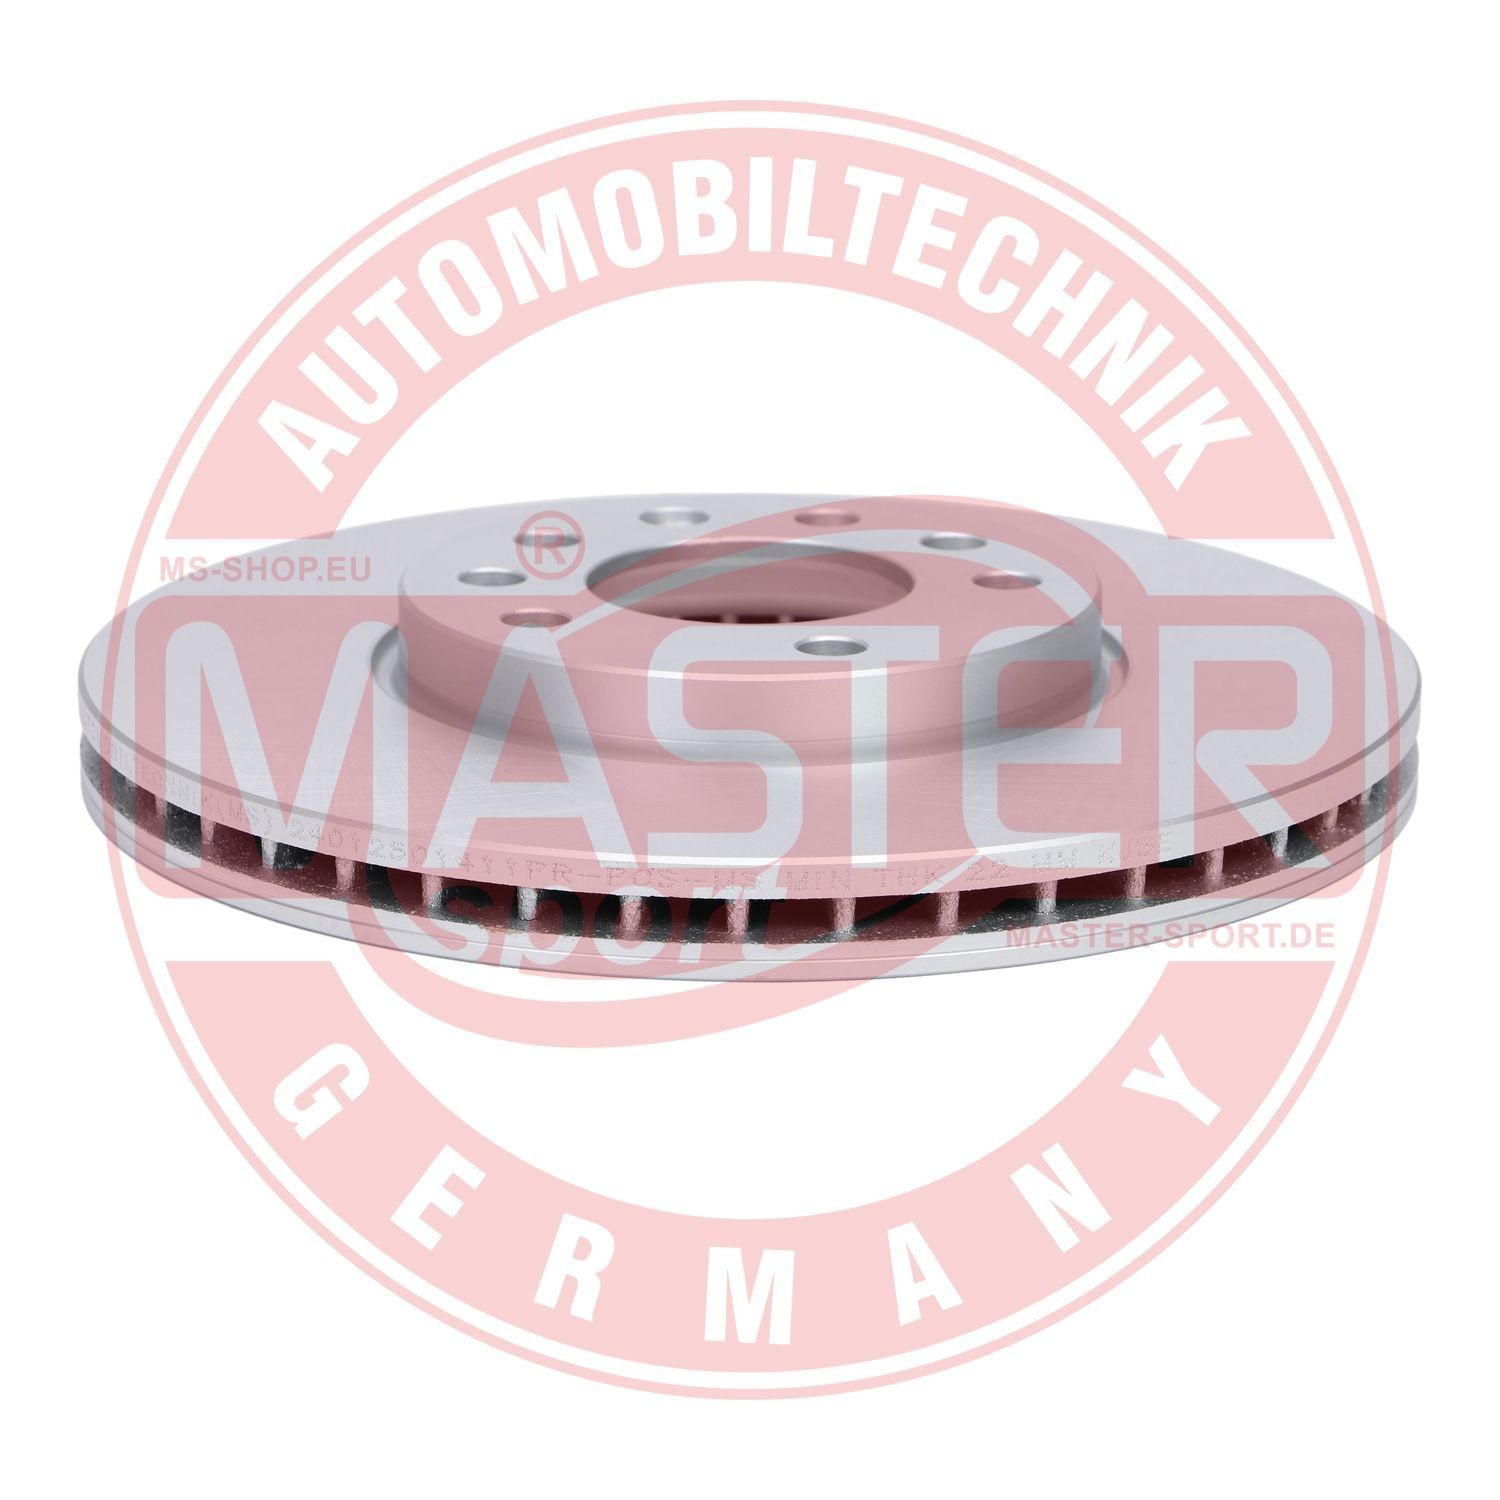 212501415 MASTER-SPORT Front Axle, 285x24,9mm, 5x110, Vented, Coated, High-carbon Ø: 285mm, Num. of holes: 5, Brake Disc Thickness: 24,9mm Brake rotor 24012501411PR-PCS-MS buy